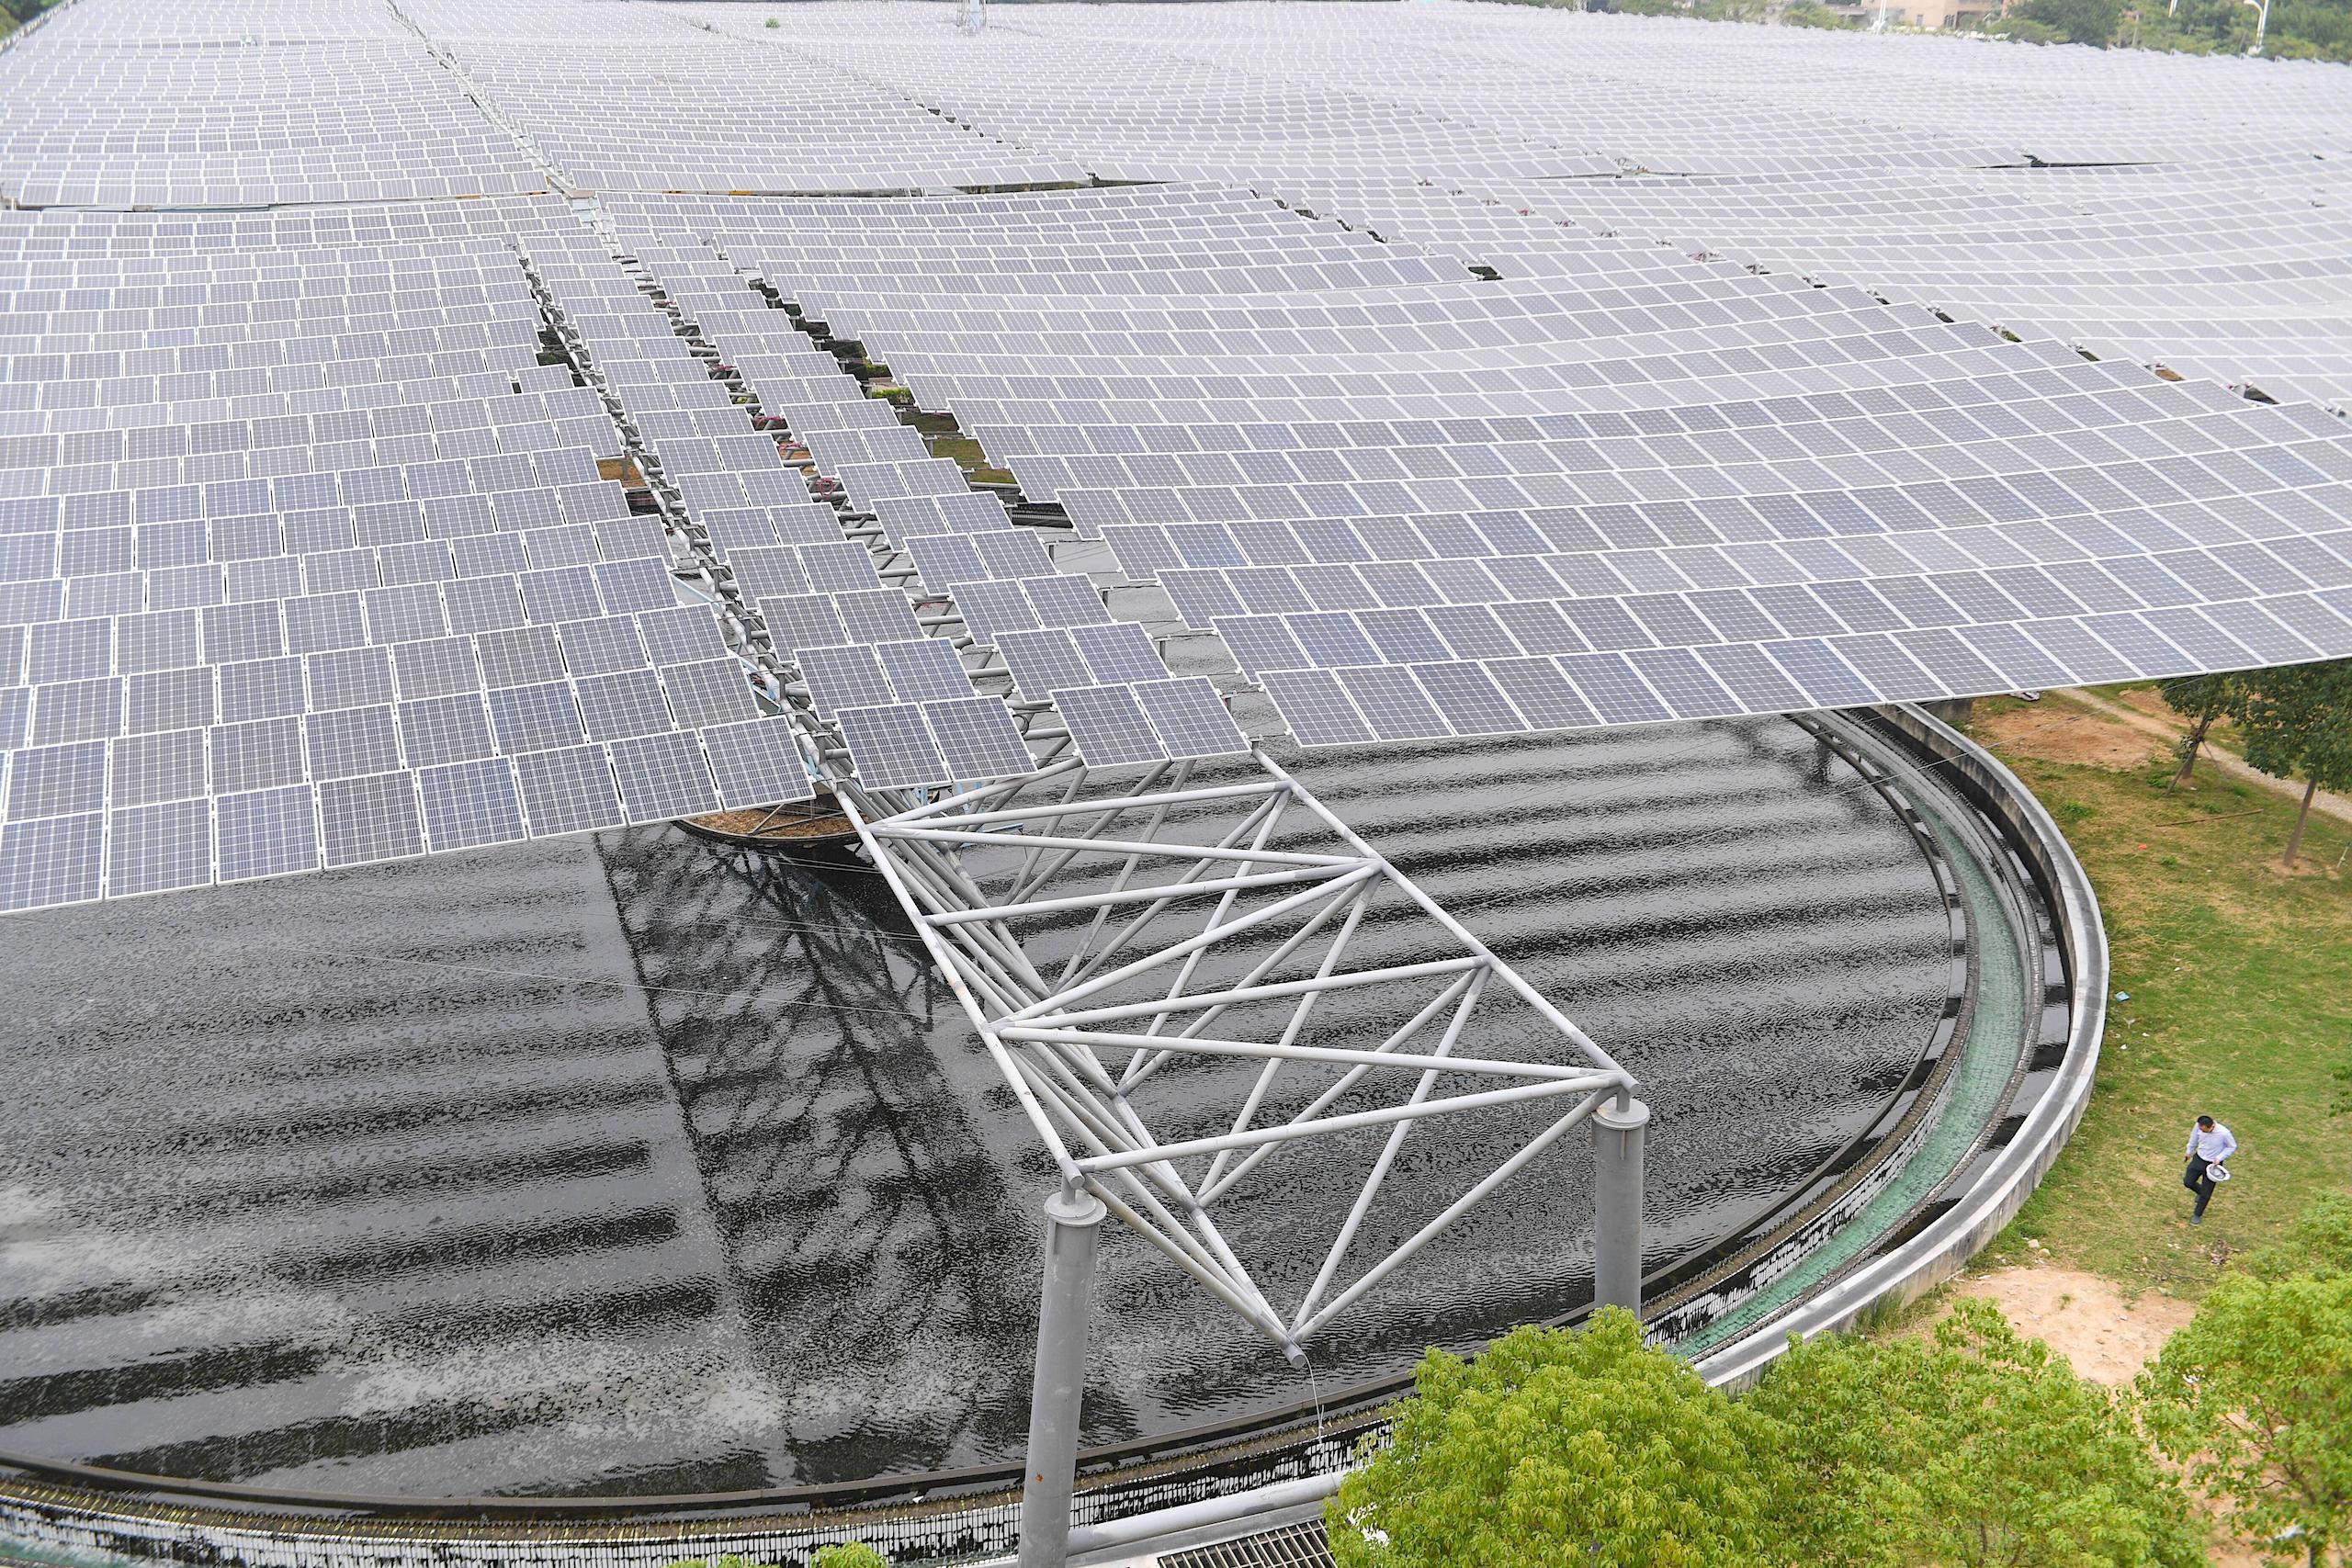 <p>Solar panels deliver power to a wastewater-treatment plant. A similar project recently received climate finance in Xiangtan City, Hunan, one of China’s 23 pilot cities for such finance. (Image: Song Weiwei / Alamy)</p>